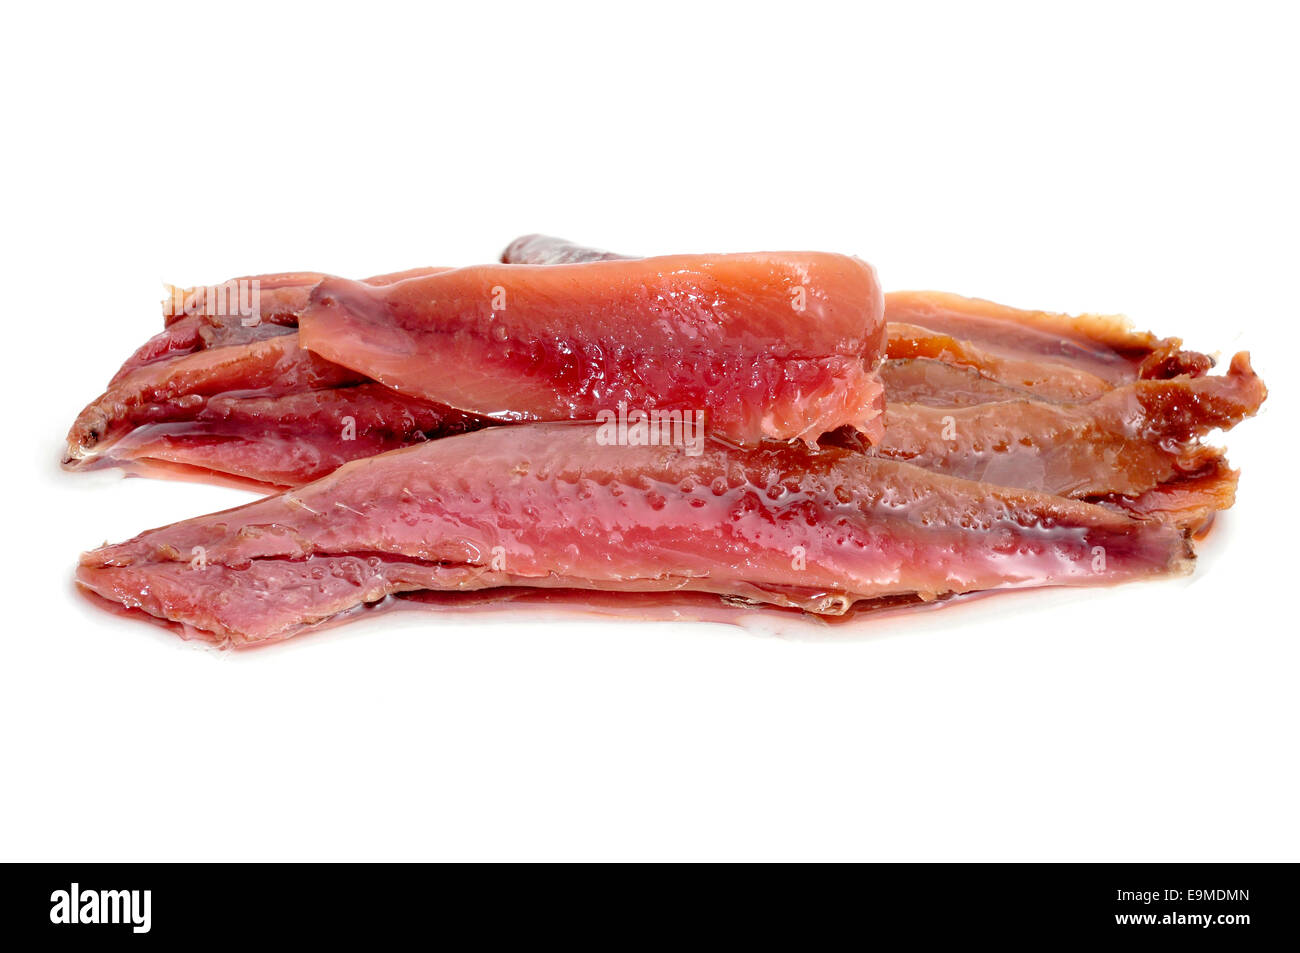 some marinated anchovy fillets on a white background Stock Photo